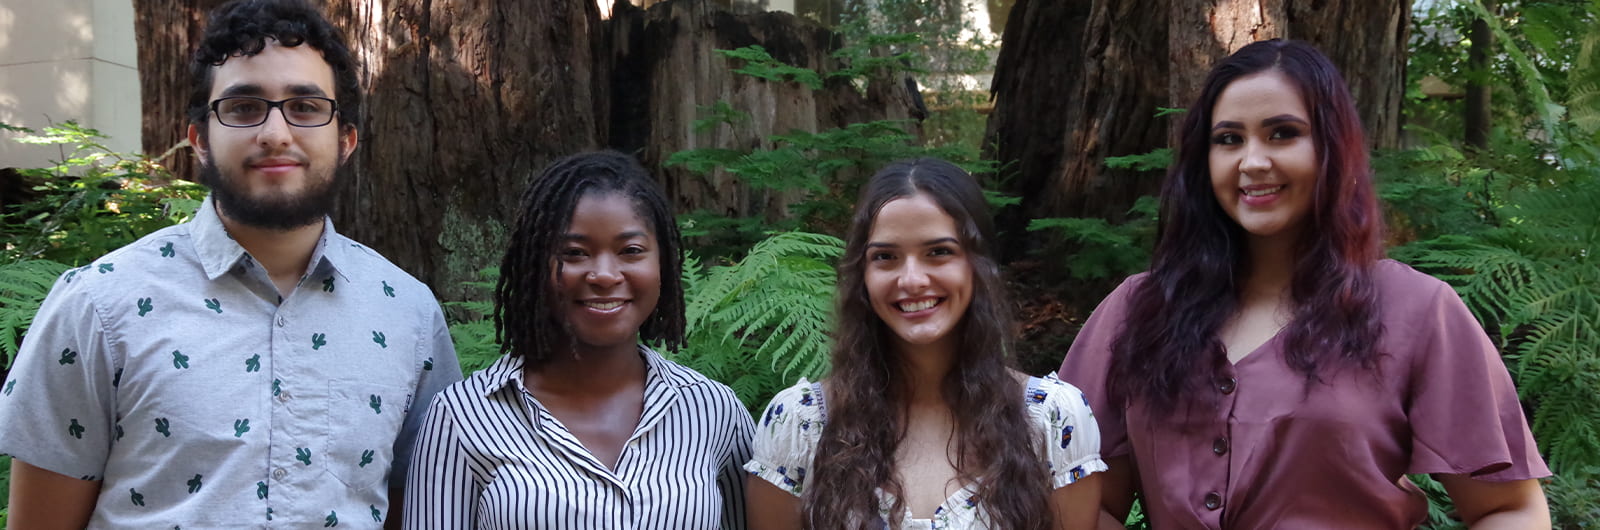 A photo of four smiling students standing in front of redwoods.